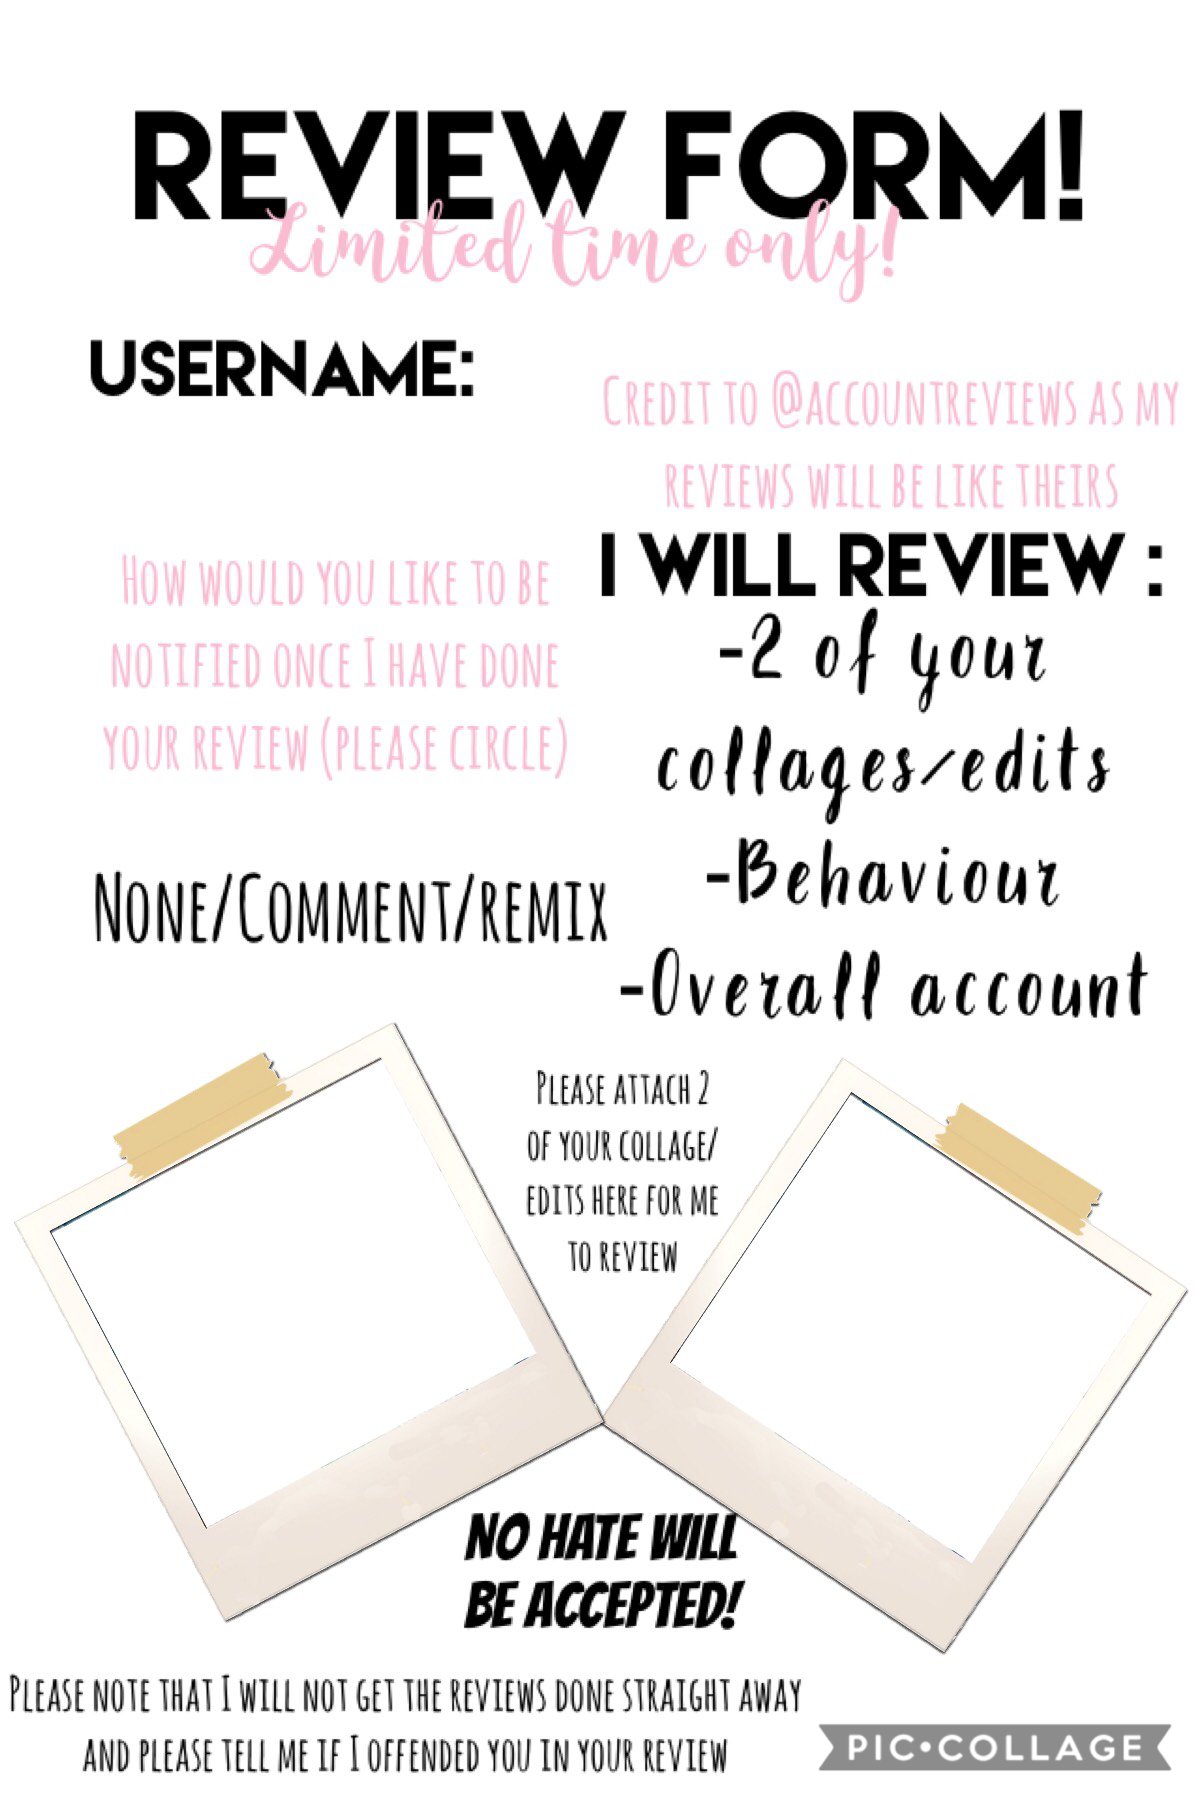 Review form! Tap!
Please fill out the form if you want a review! I won’t be doing lots of reviews as I will only be accepting the first 10-20. 